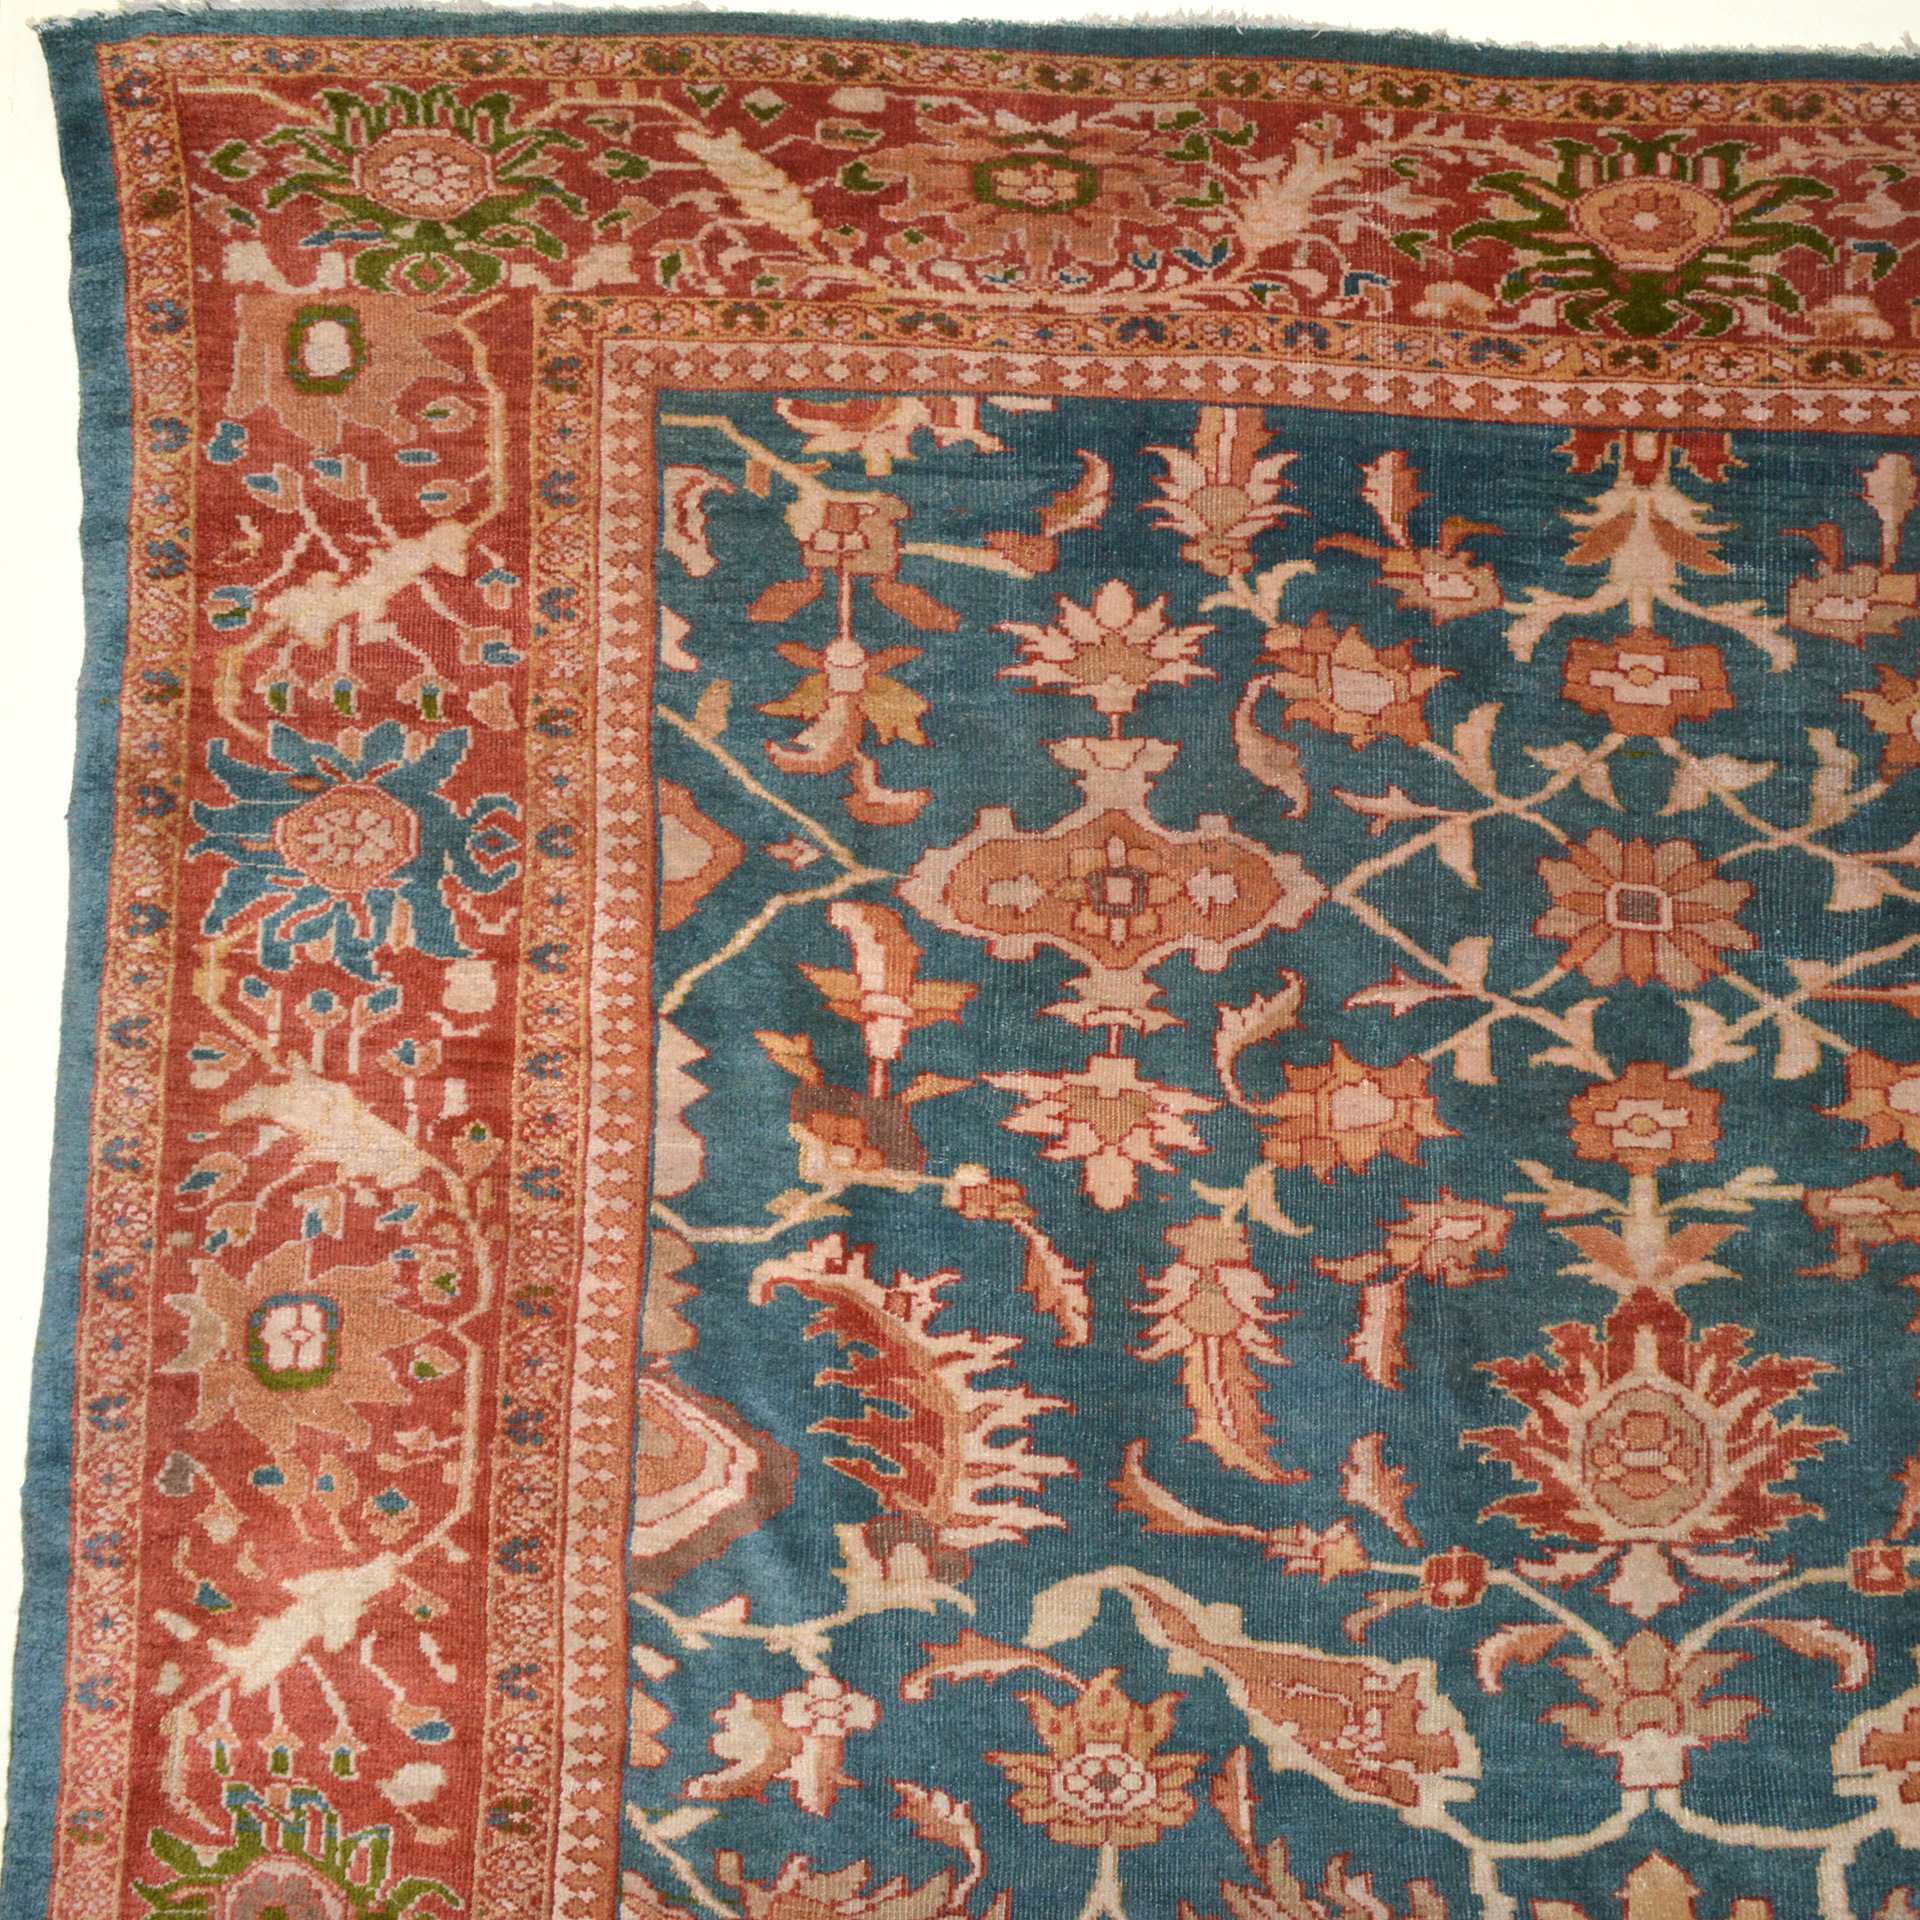 Antique Persian Sultanabad carpet with steel blue field and all-over design